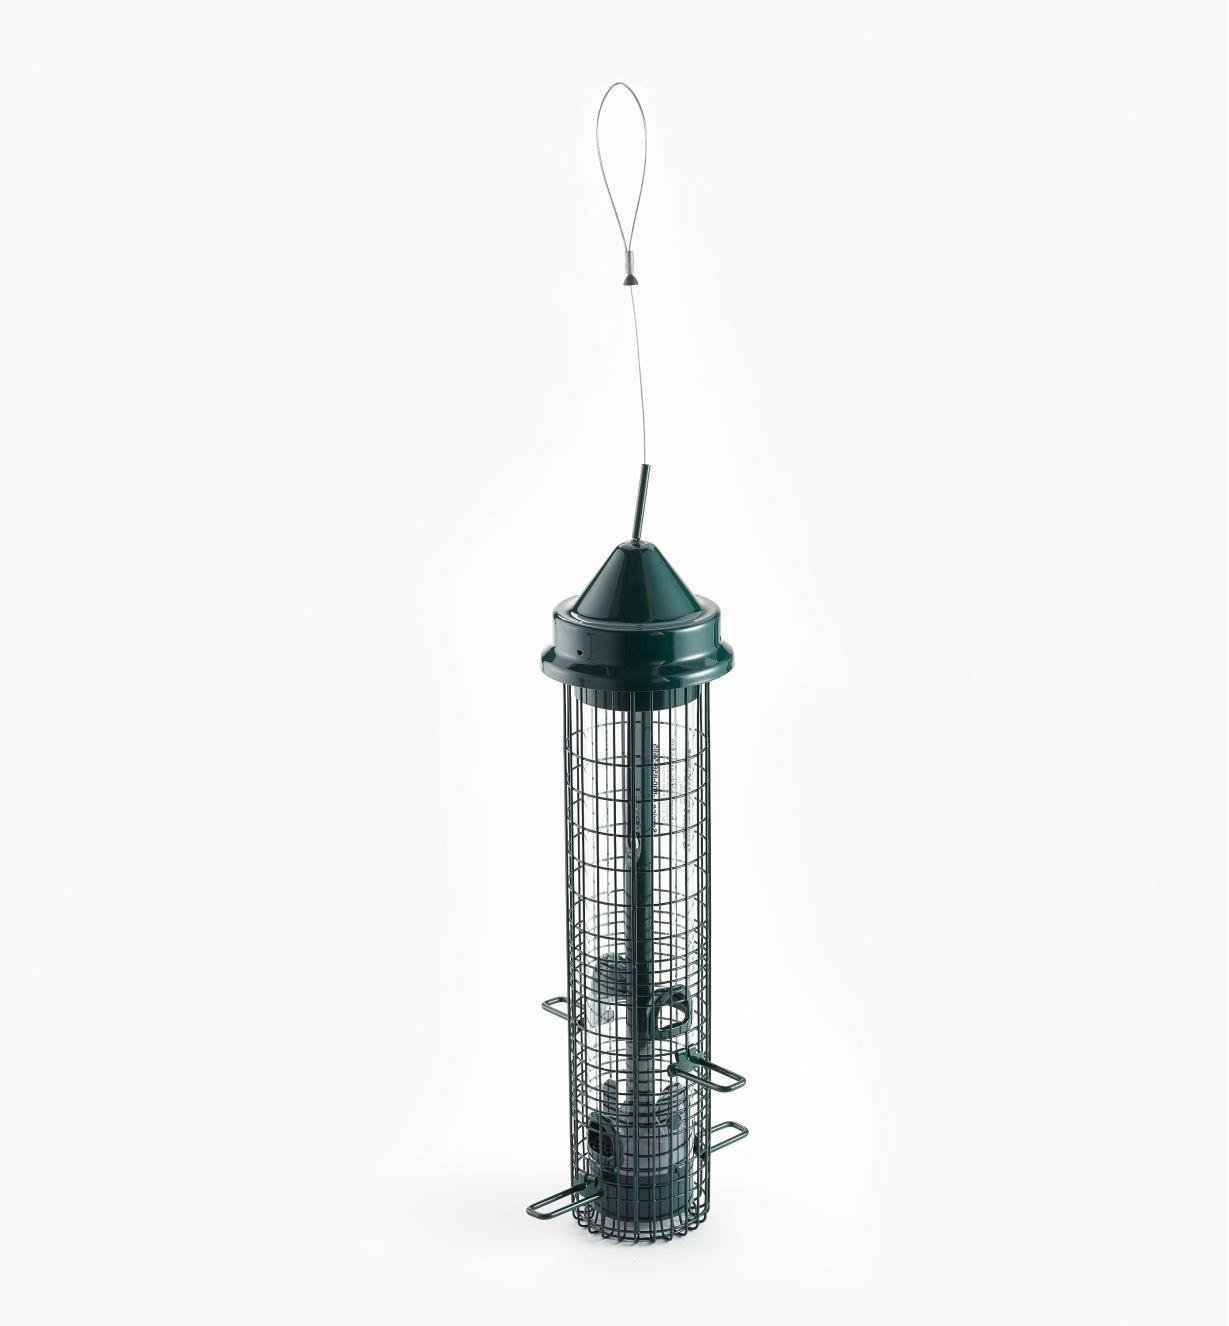 AG327 - Squirrel Buster Classic Feeder